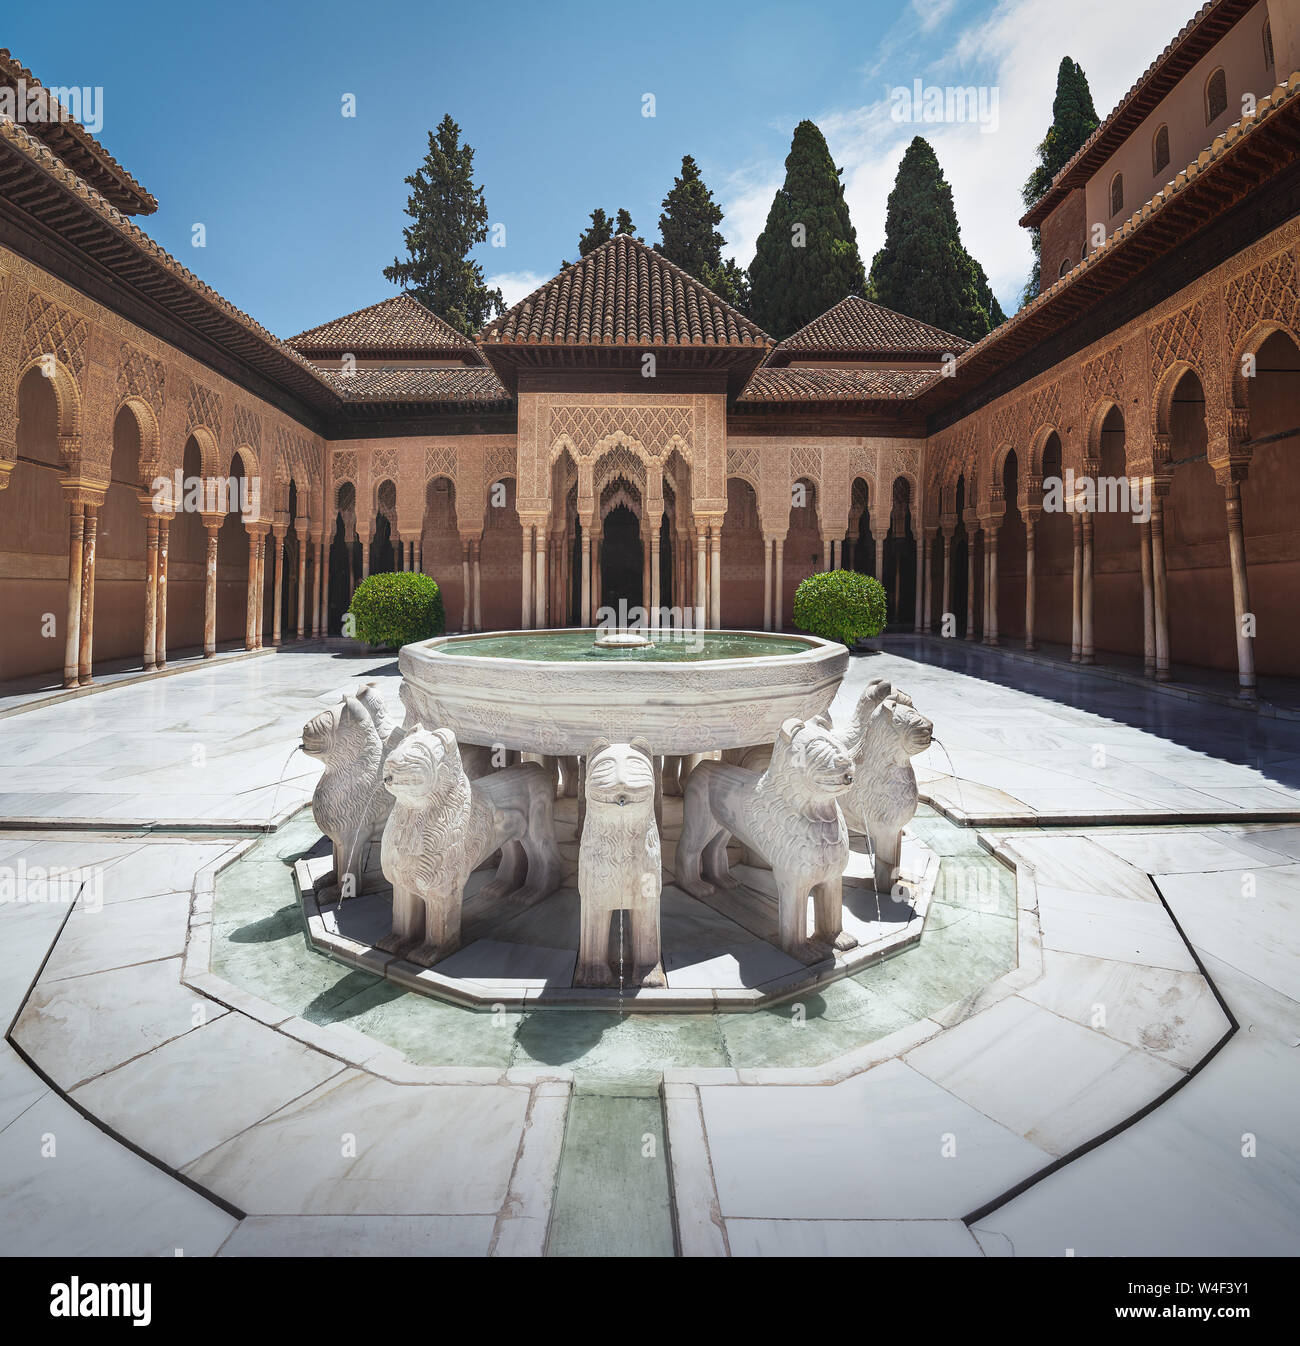 Cout of the Lions in the Nasrid Palaces of Alhambra - Granada, Andalusia, Spain Stock Photo